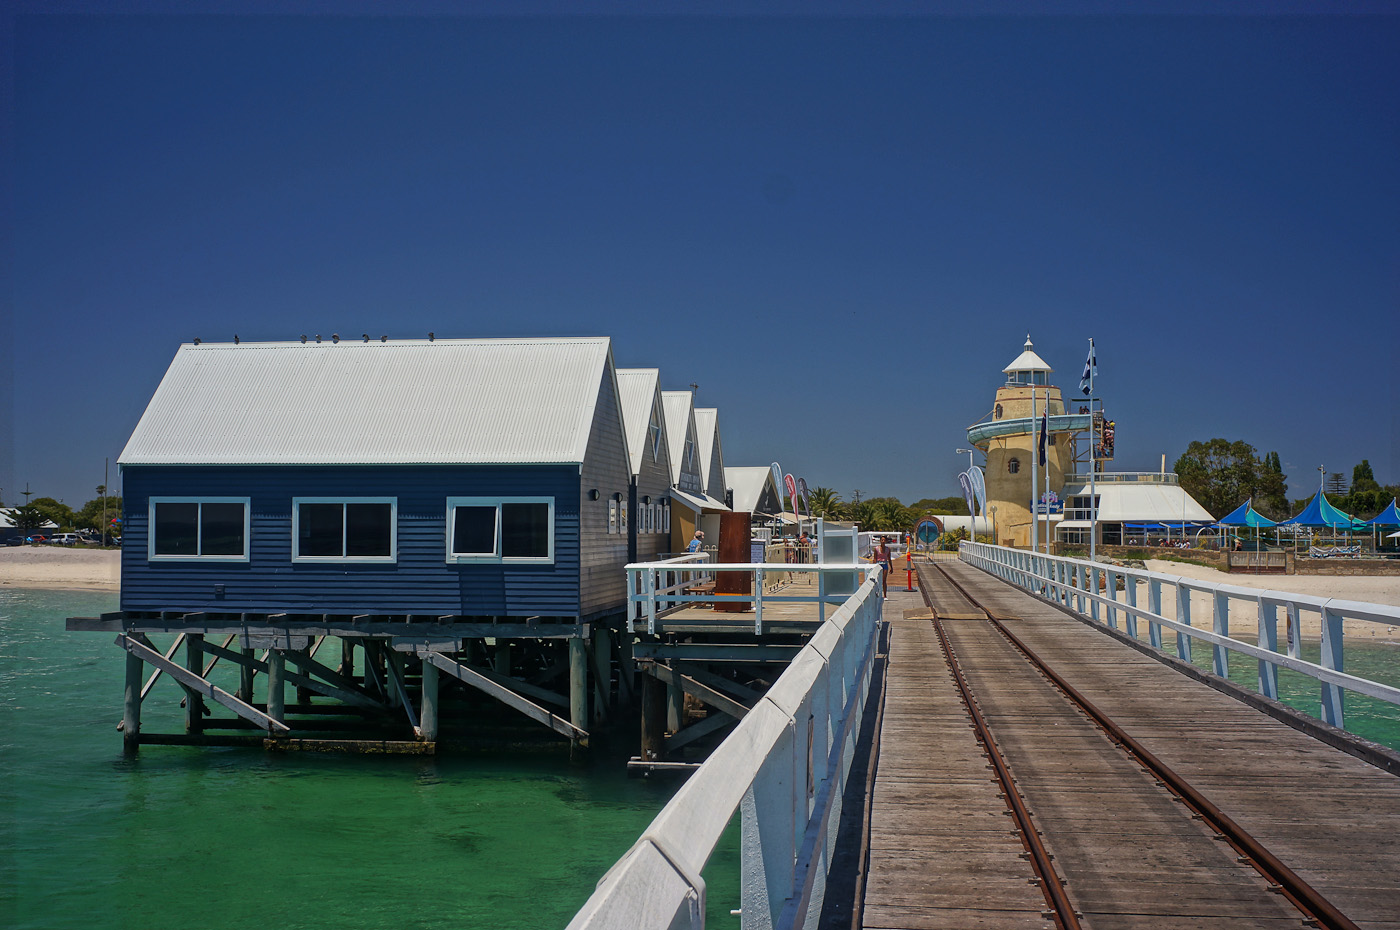 The Busselton Jetty interpretive center with an amusement park in the background